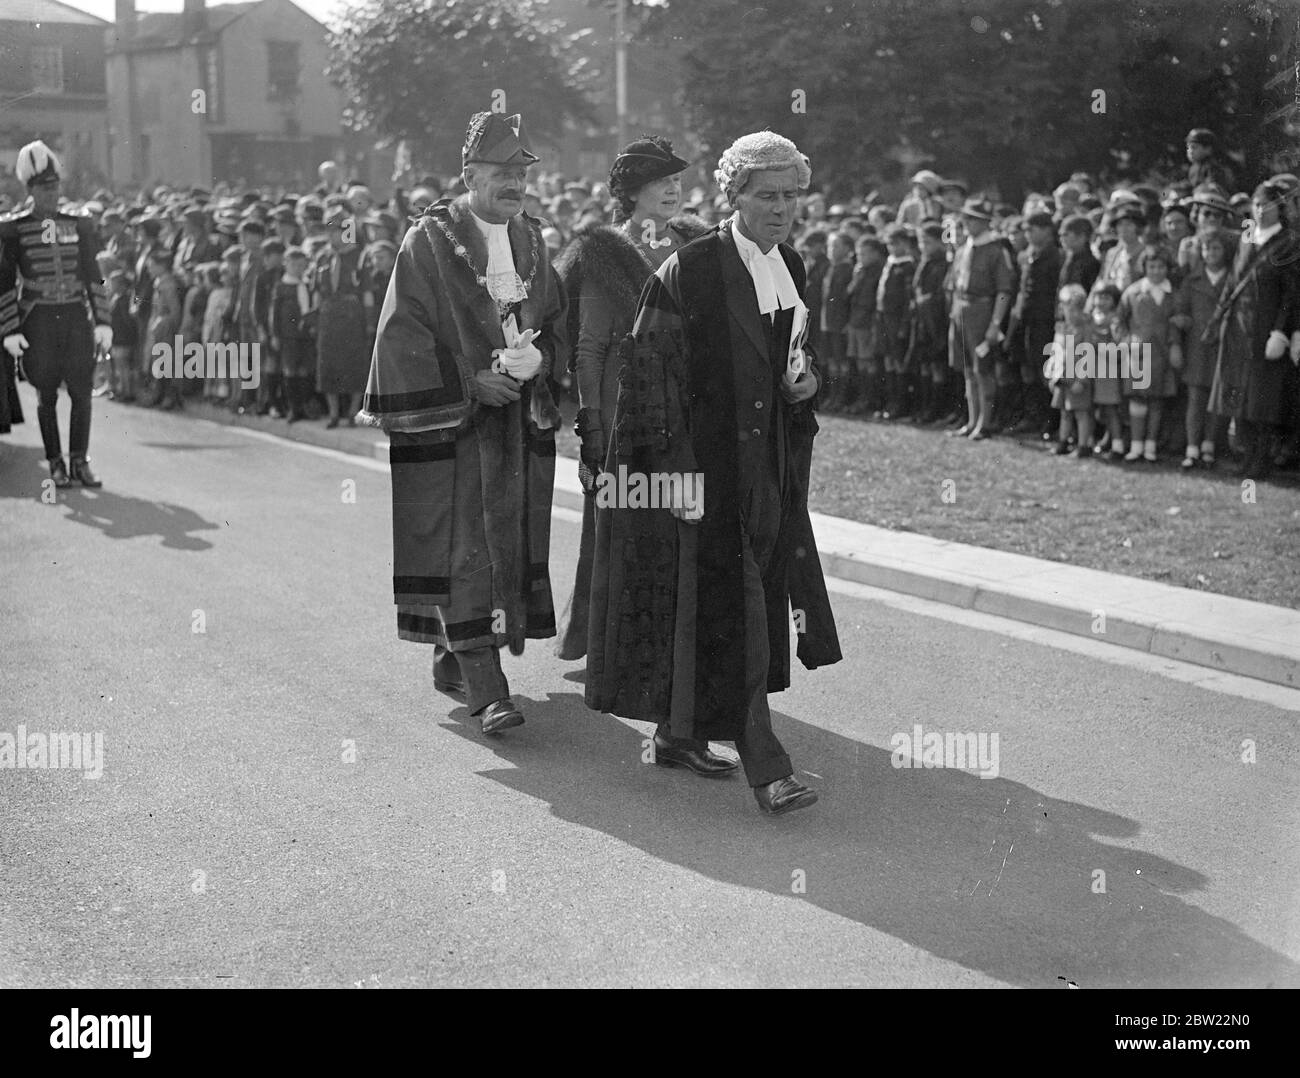 The Lord Mayor of London, Sir George Broadbridge walking in procession to the new town Hall for the opening, at Romford, he was there to present at two important ceremonies when the Essex suburb became a Borough. He presented the Charter of incorporation to the Charter Mayor councillor CH Allen. 16 September 1937. Stock Photo